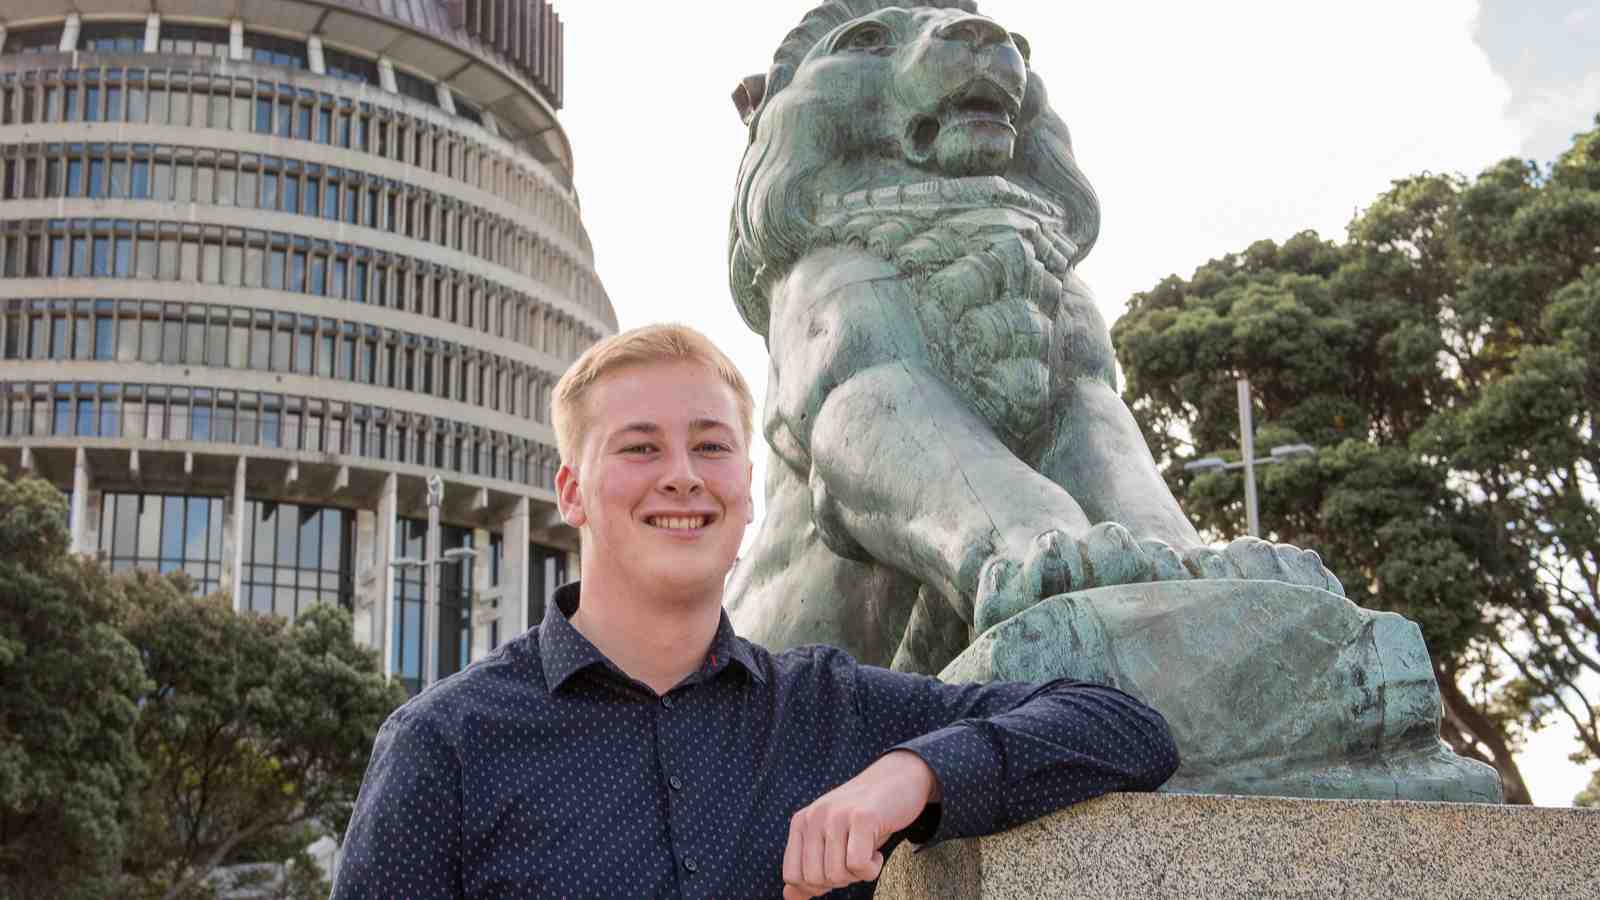 Brad Olsen will meet the Queen when he travels to England as part of The Queen's Young Leaders Award